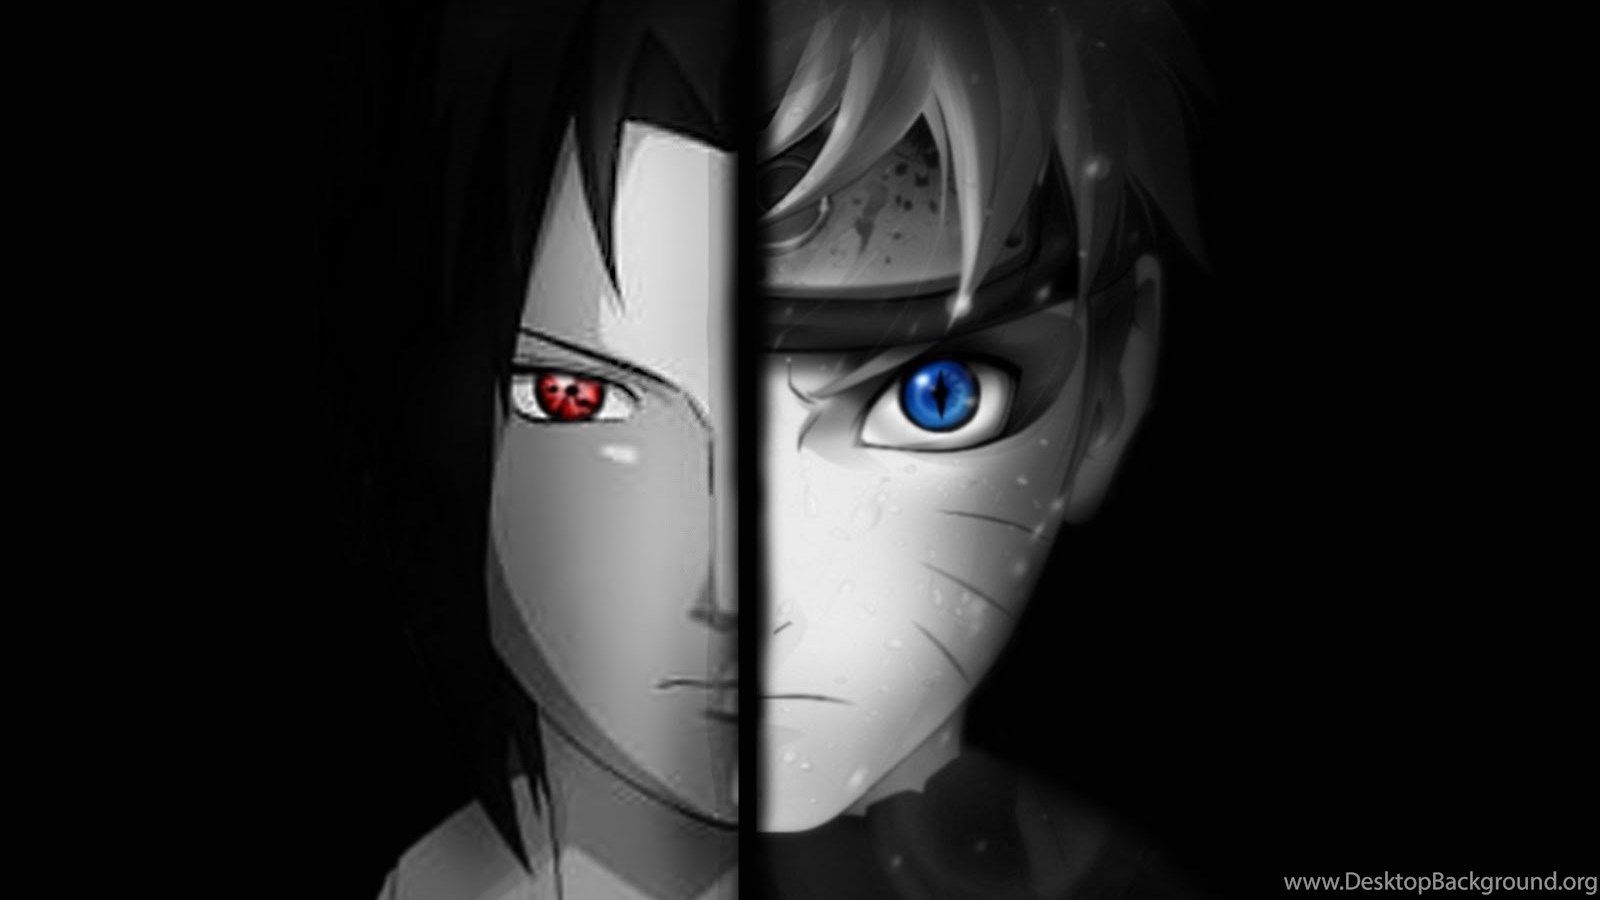 Black And White Naruto Wallpaper posted .cutewallpaper.org